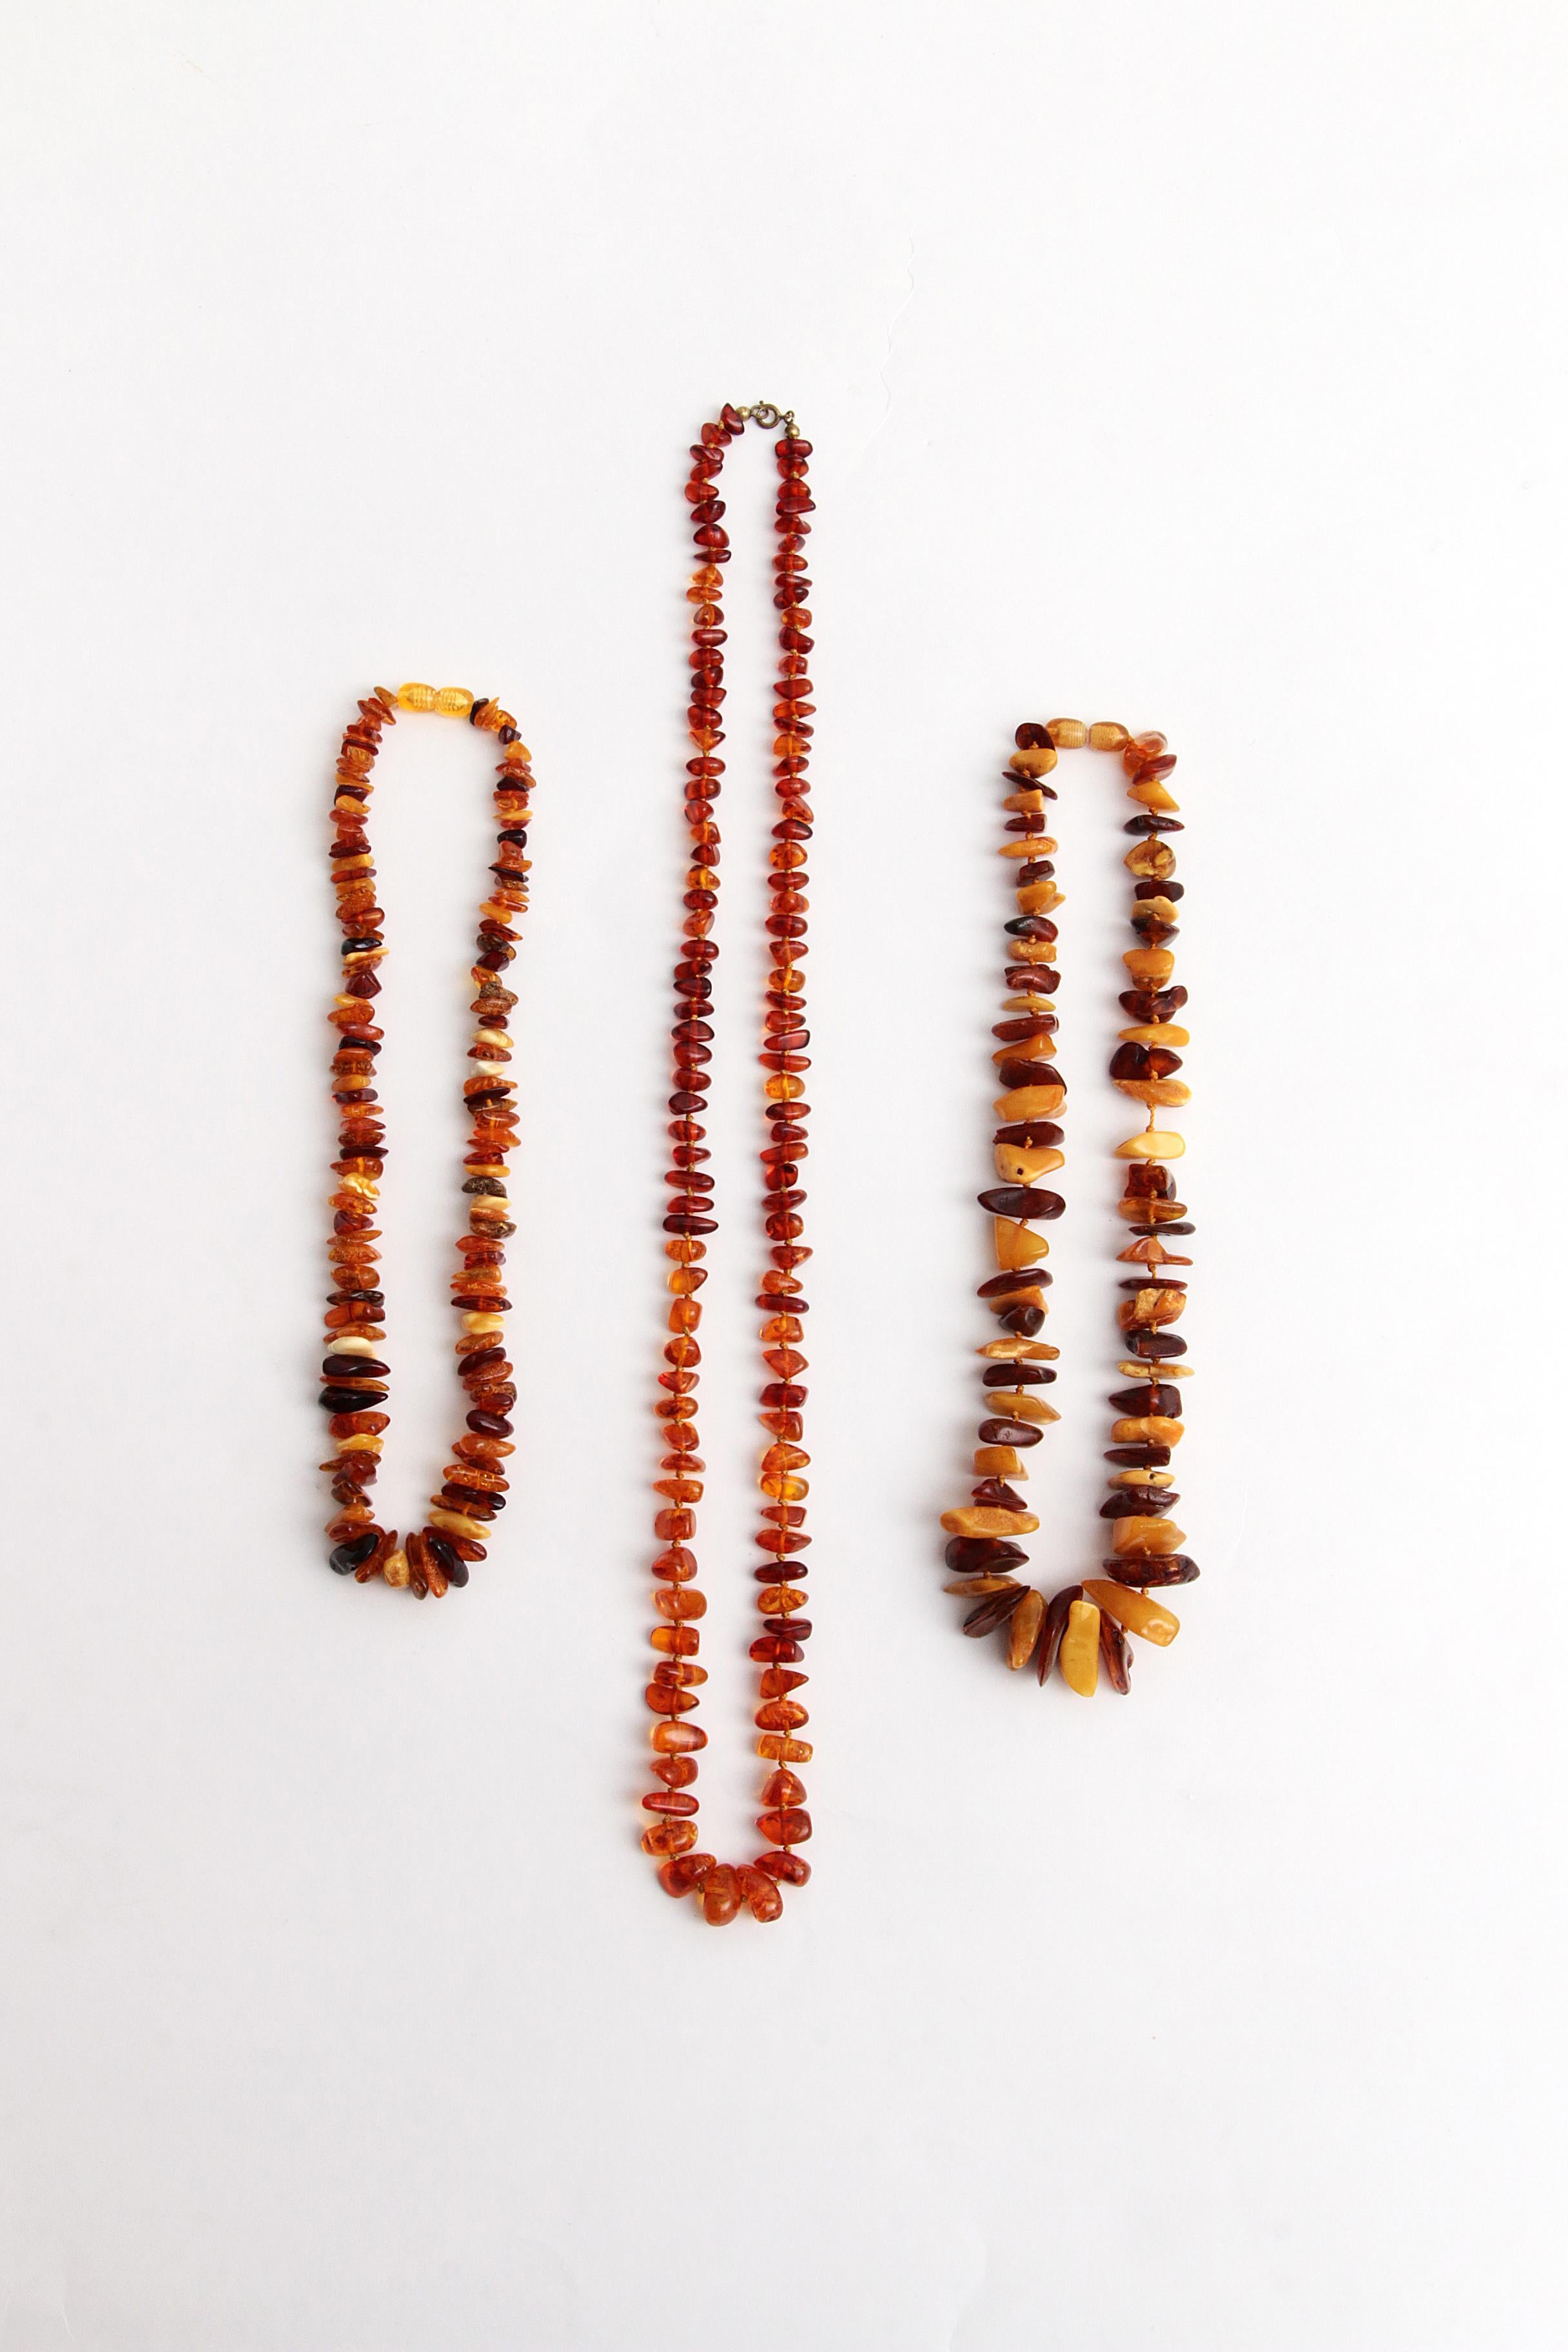 Do you also want to wear something nice and especially something that others don't have, this might be something for you.

These are three amber necklaces strung with irregular pieces of amber.

The closure also fits very well with the